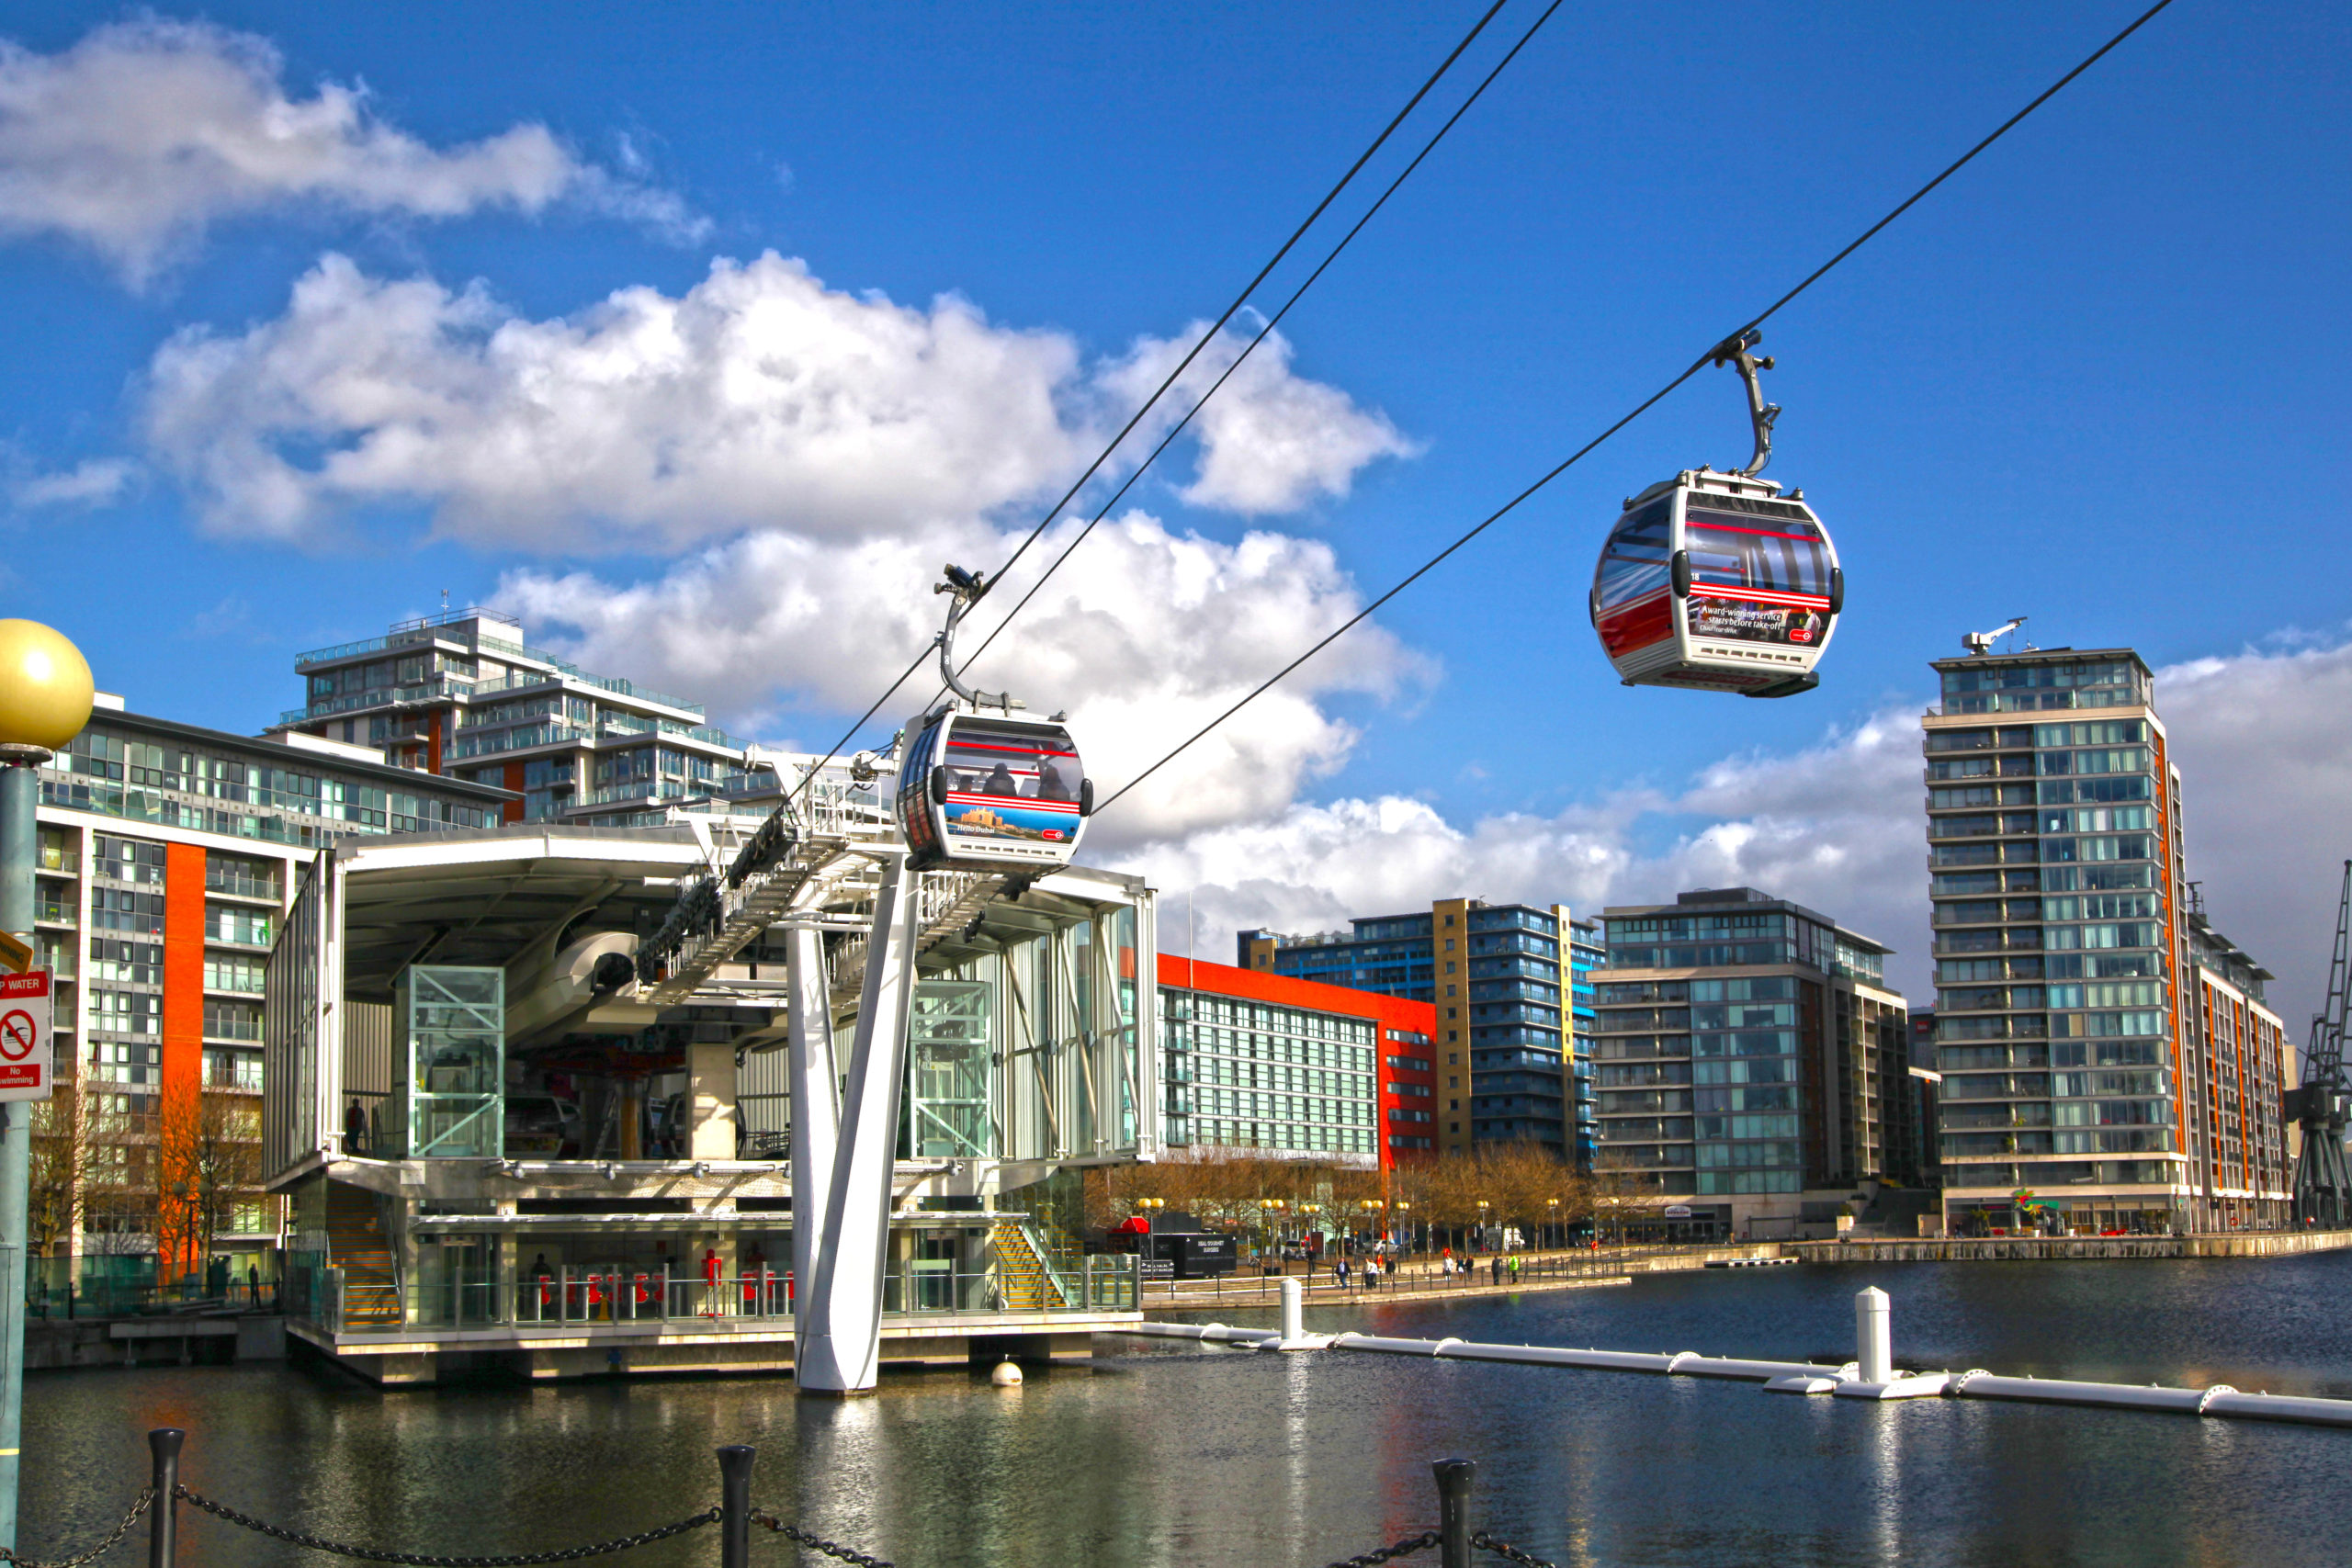 London's Cable car connecting Excel exhibition centre and O2 arena.